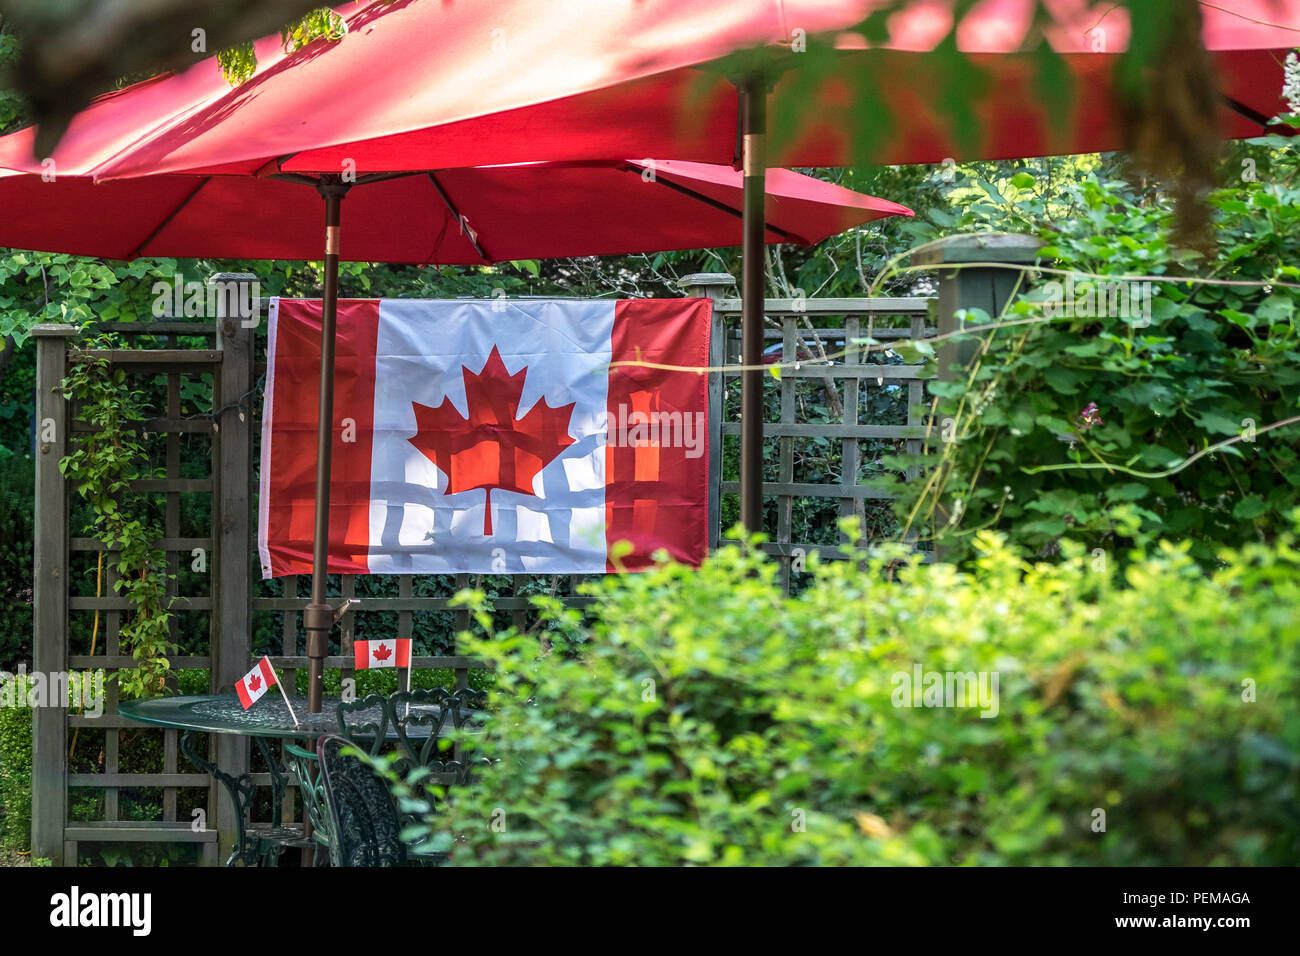 A Canada flag hangs on a fence under two red umbrellas. Stock Photo